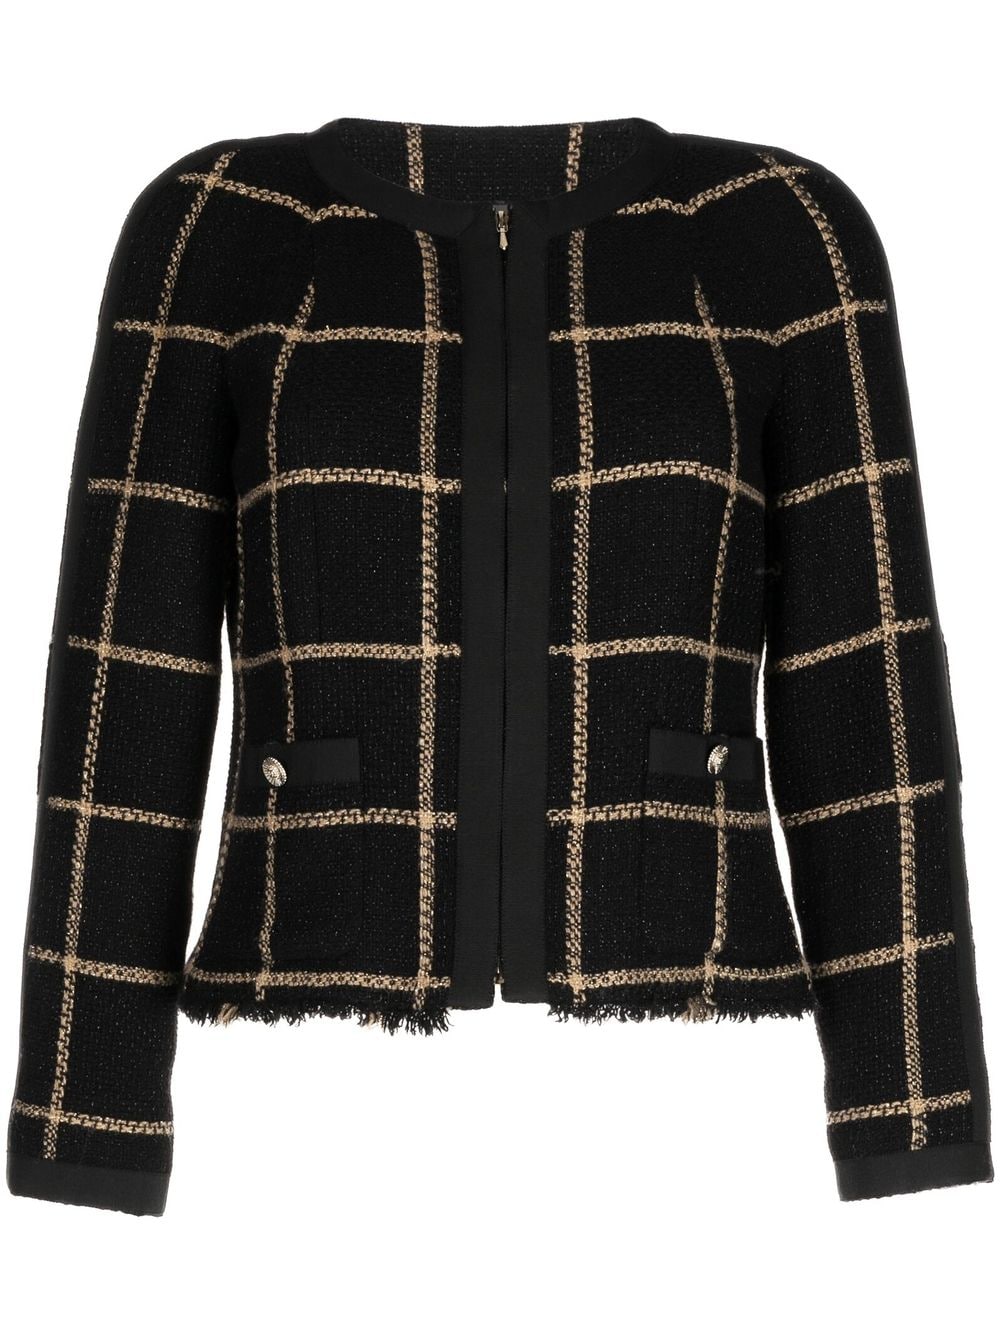 Chanel Pre Owned Button-Up Tweed Jacket - ShopStyle